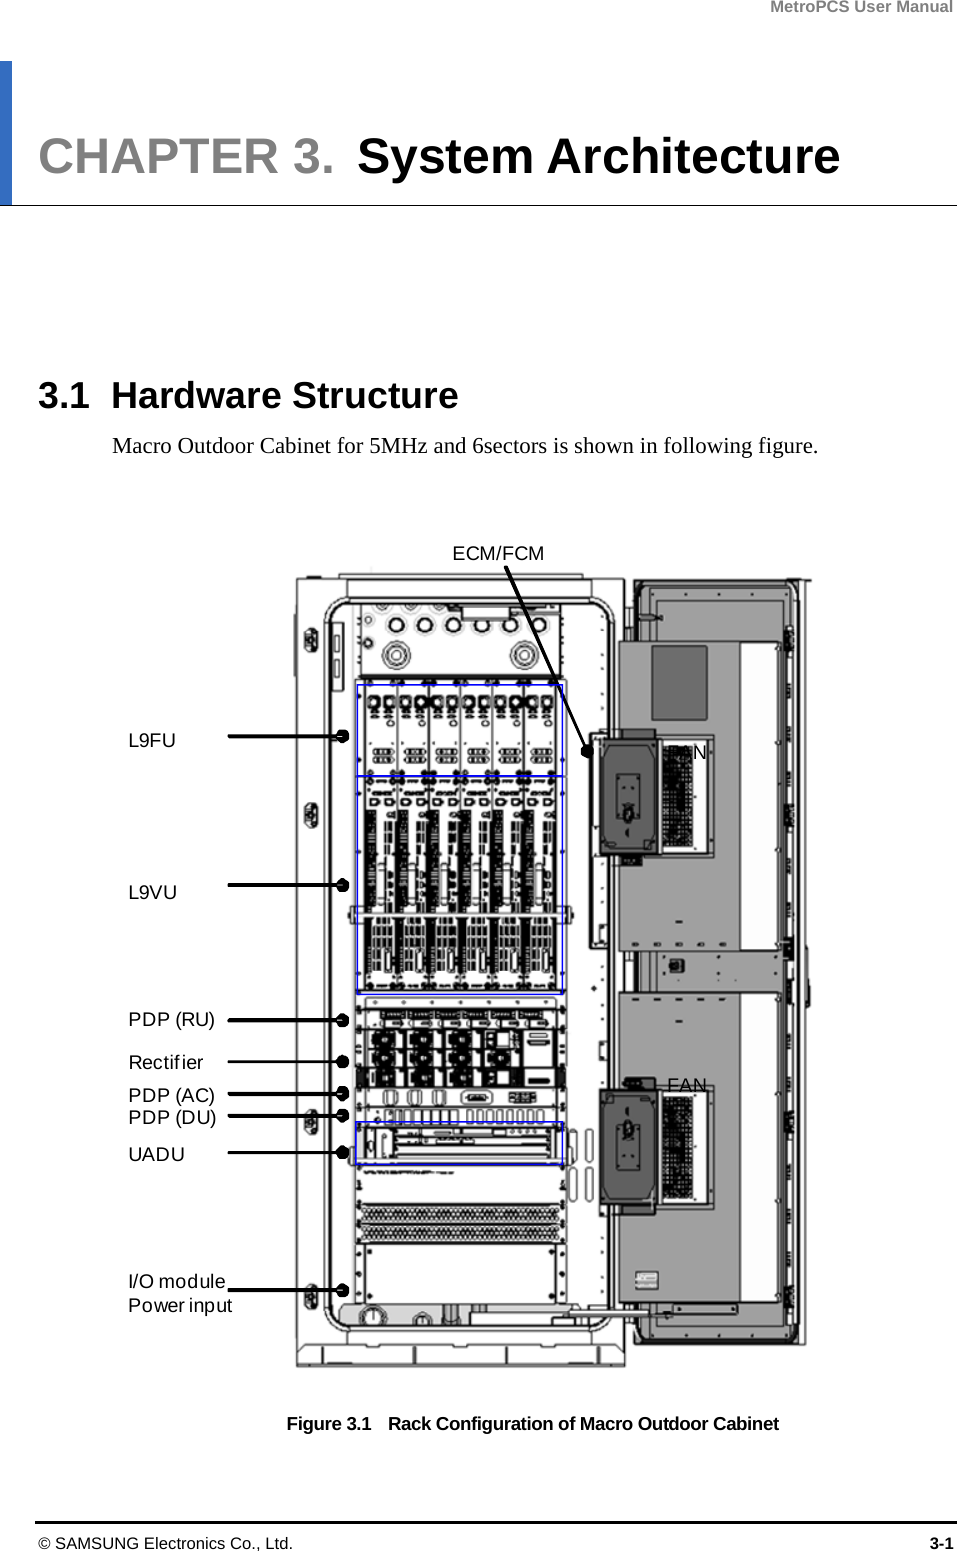 MetroPCS User Manual © SAMSUNG Electronics Co., Ltd.  3-1 CHAPTER 3.  System Architecture      3.1 Hardware Structure Macro Outdoor Cabinet for 5MHz and 6sectors is shown in following figure.  Figure 3.1    Rack Configuration of Macro Outdoor Cabinet L9FUL9VUUADUPDP (RU)PDP (DU)PDP (AC)FANFANI/O modulePower inputECM/FCMRectifier